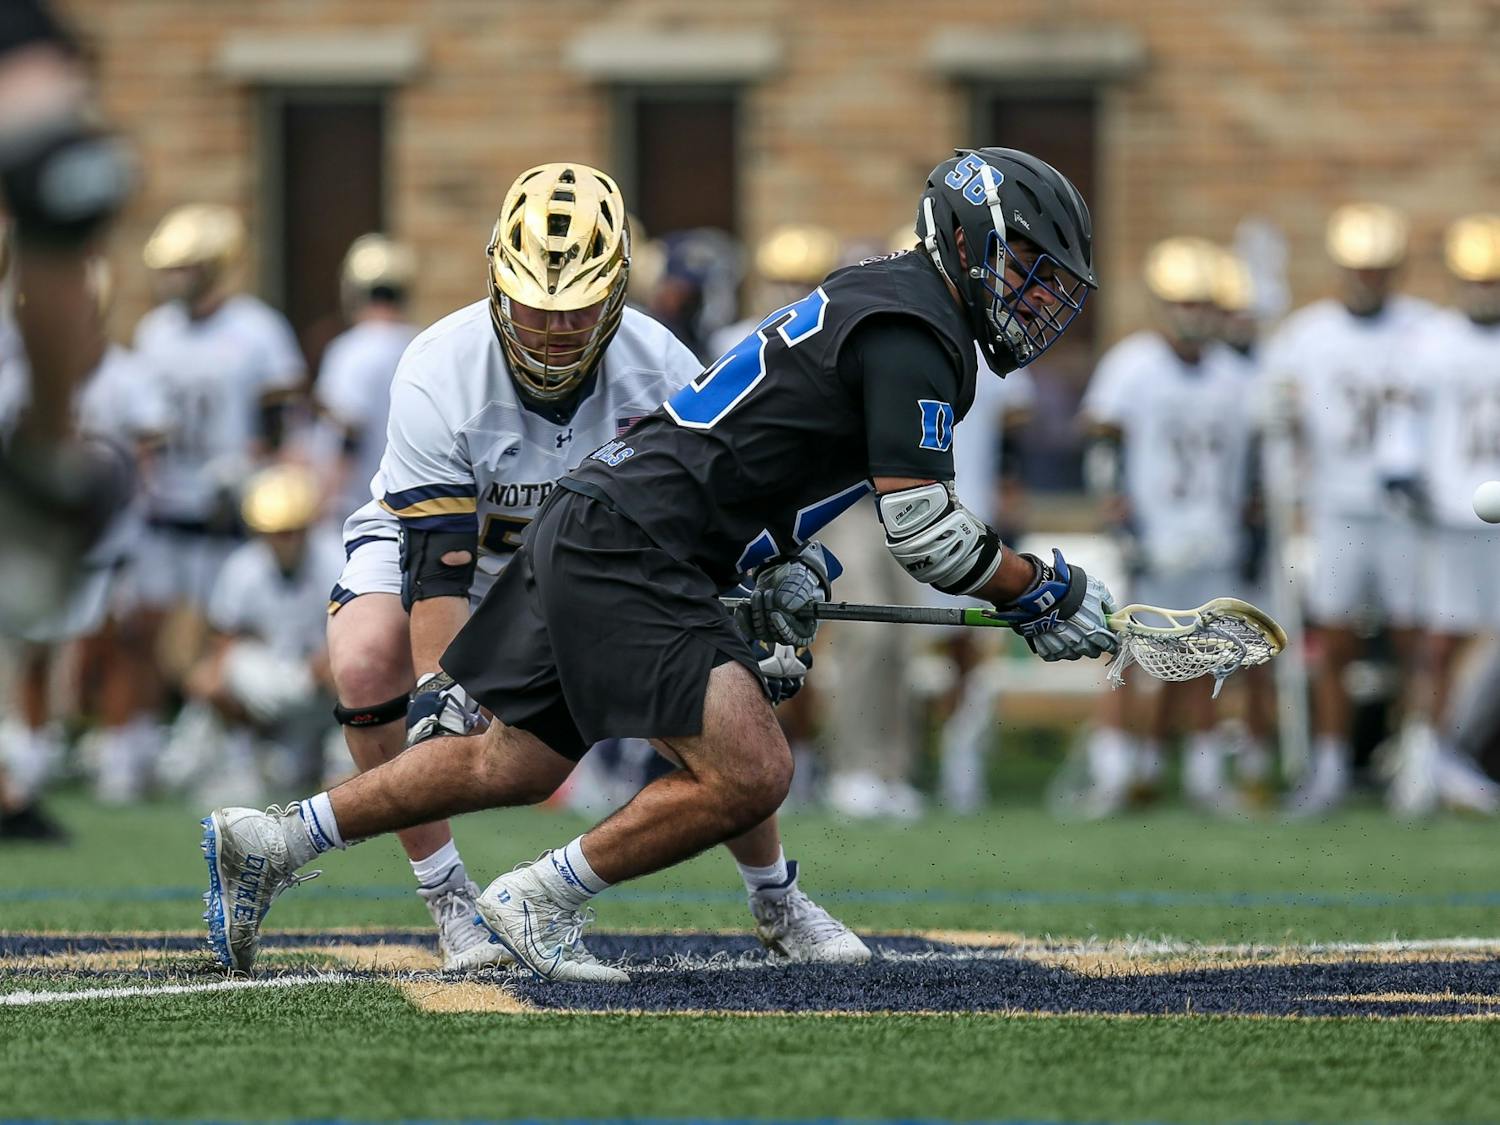 Duke had trouble keeping the ball in its possession against Notre Dame.